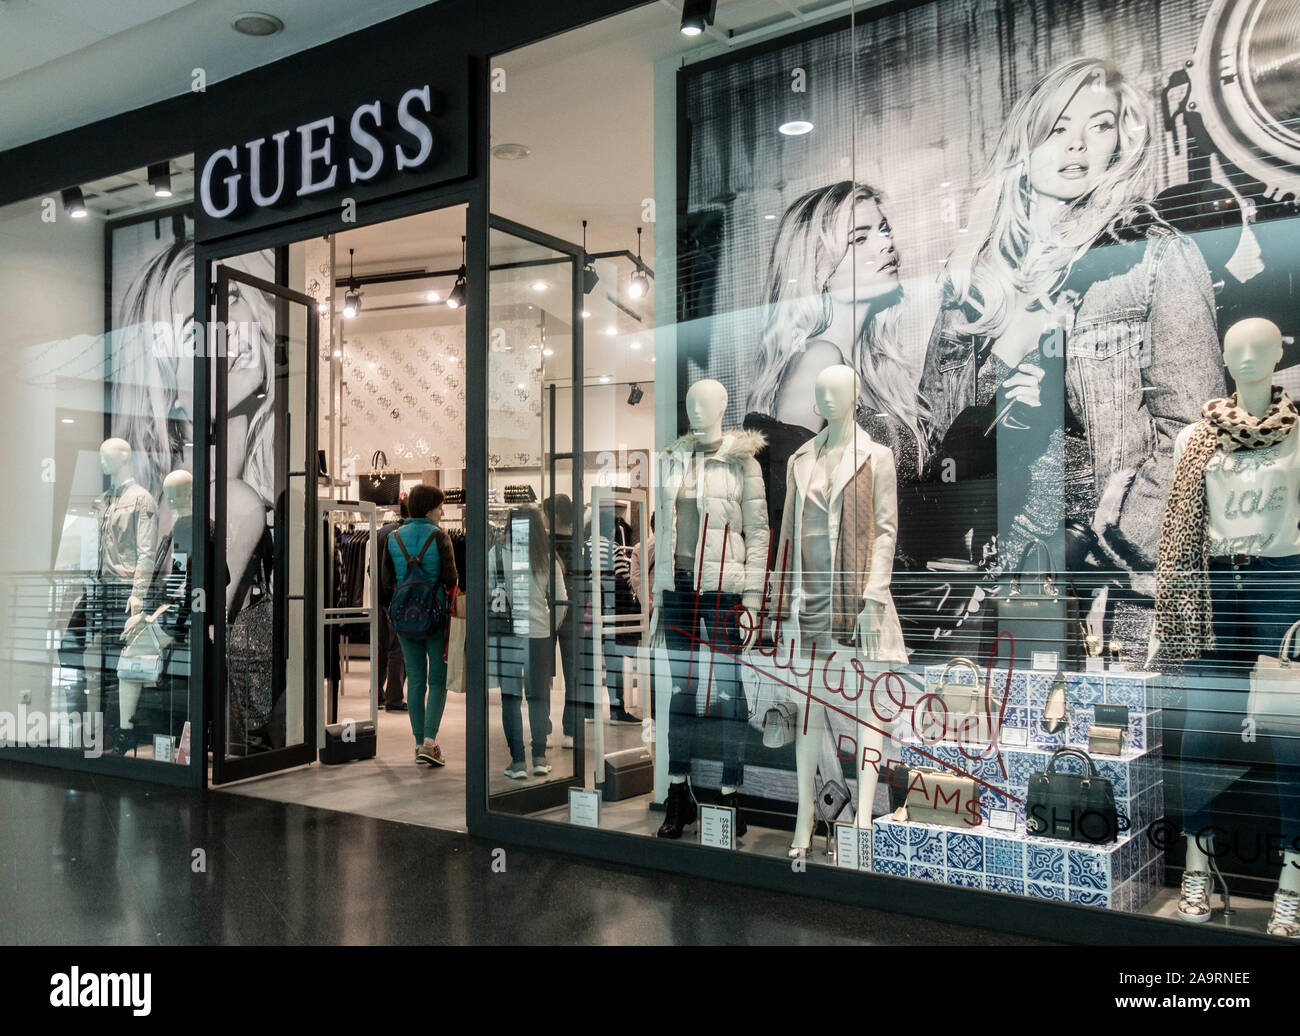 Guess clothing store in Stock Photo -